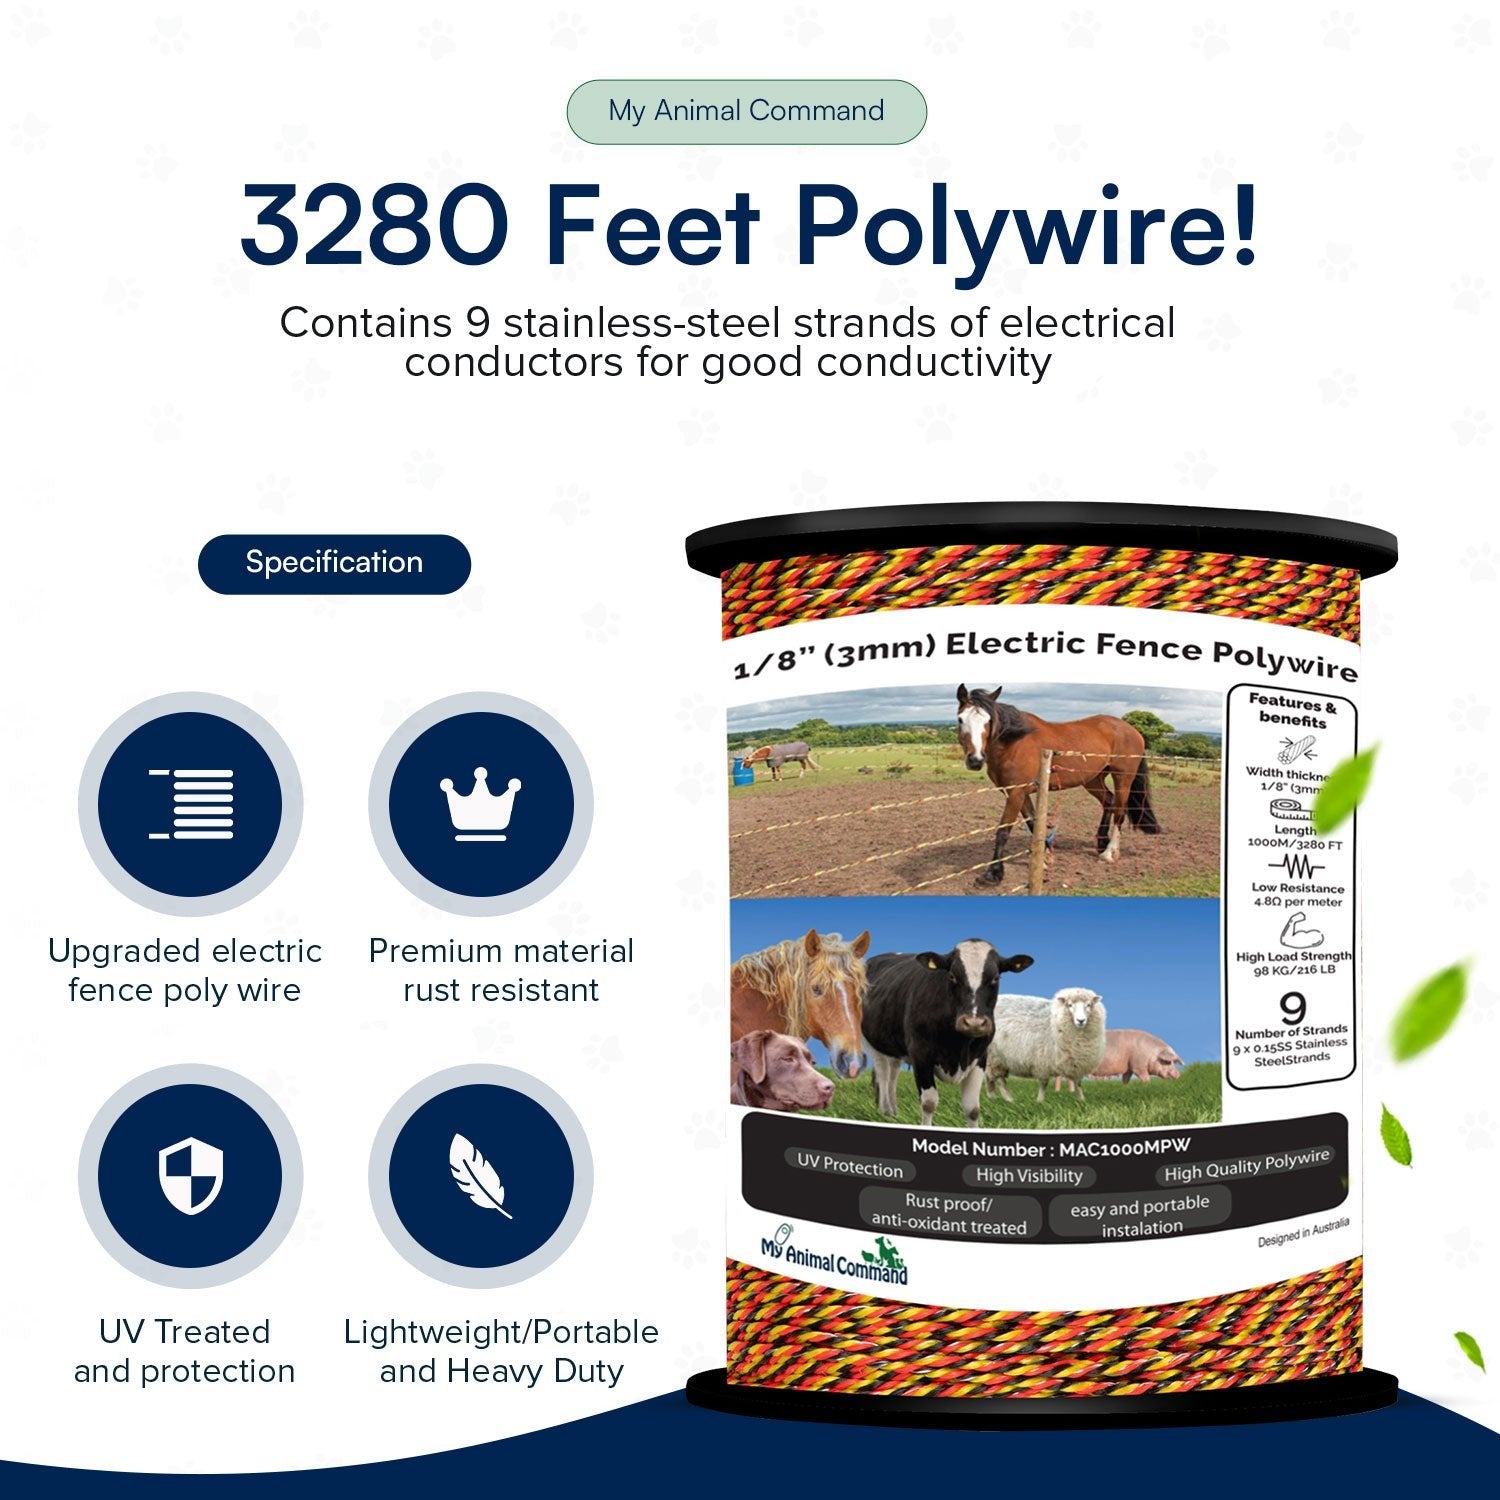 http://mypetcommand.com/cdn/shop/products/my-animal-command-18-thick-polywire-electric-fence-3280-feet1000m-length-for-containment-of-livestock-pets-animals-electric-fence-polywire-538422.jpg?v=1710814073